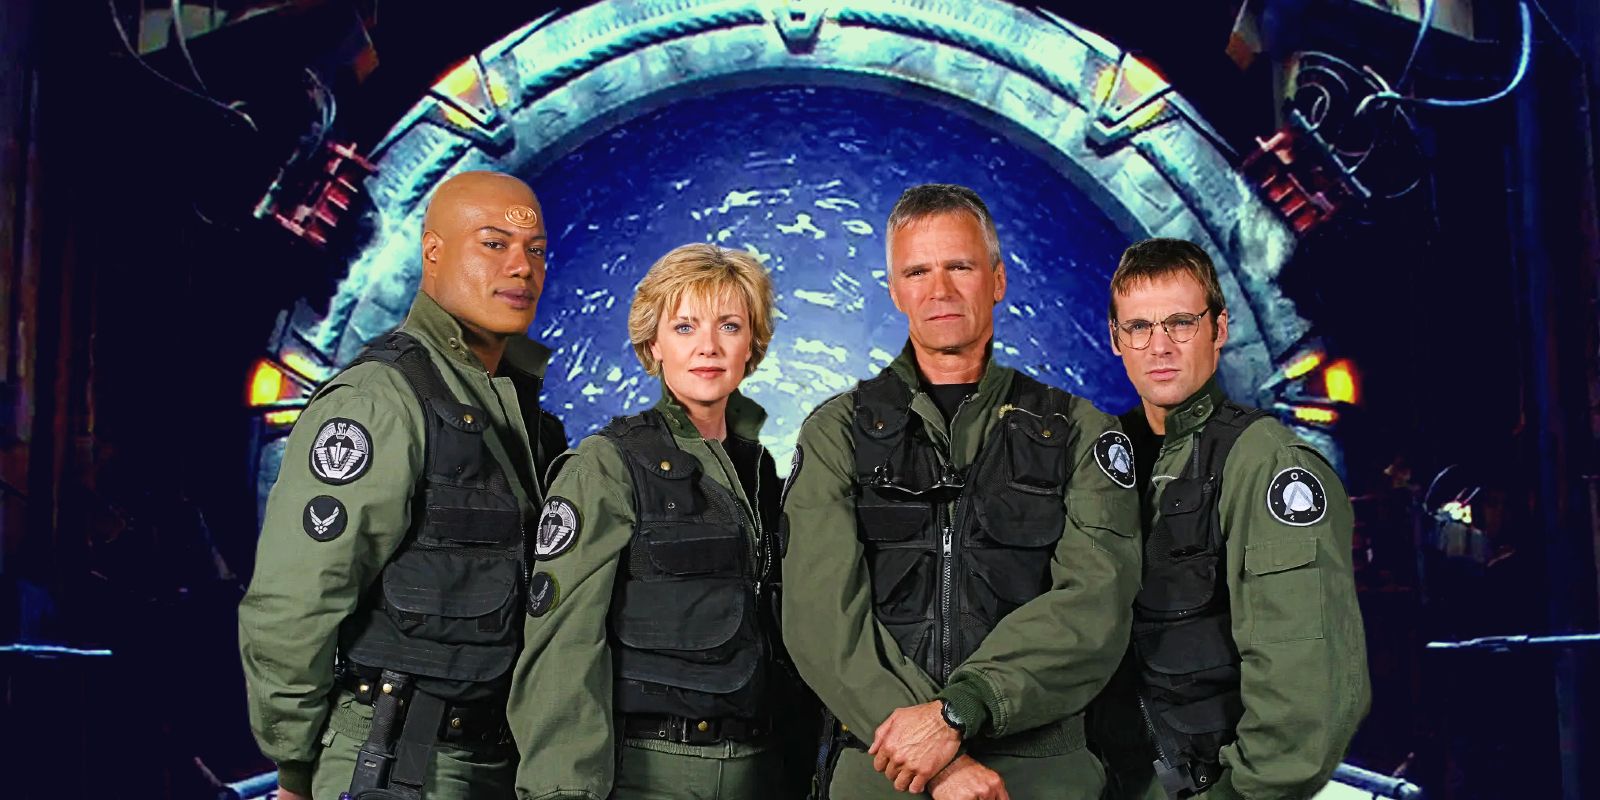 The main cast of Stargate SG-1 stand in front of the unstable vortex.